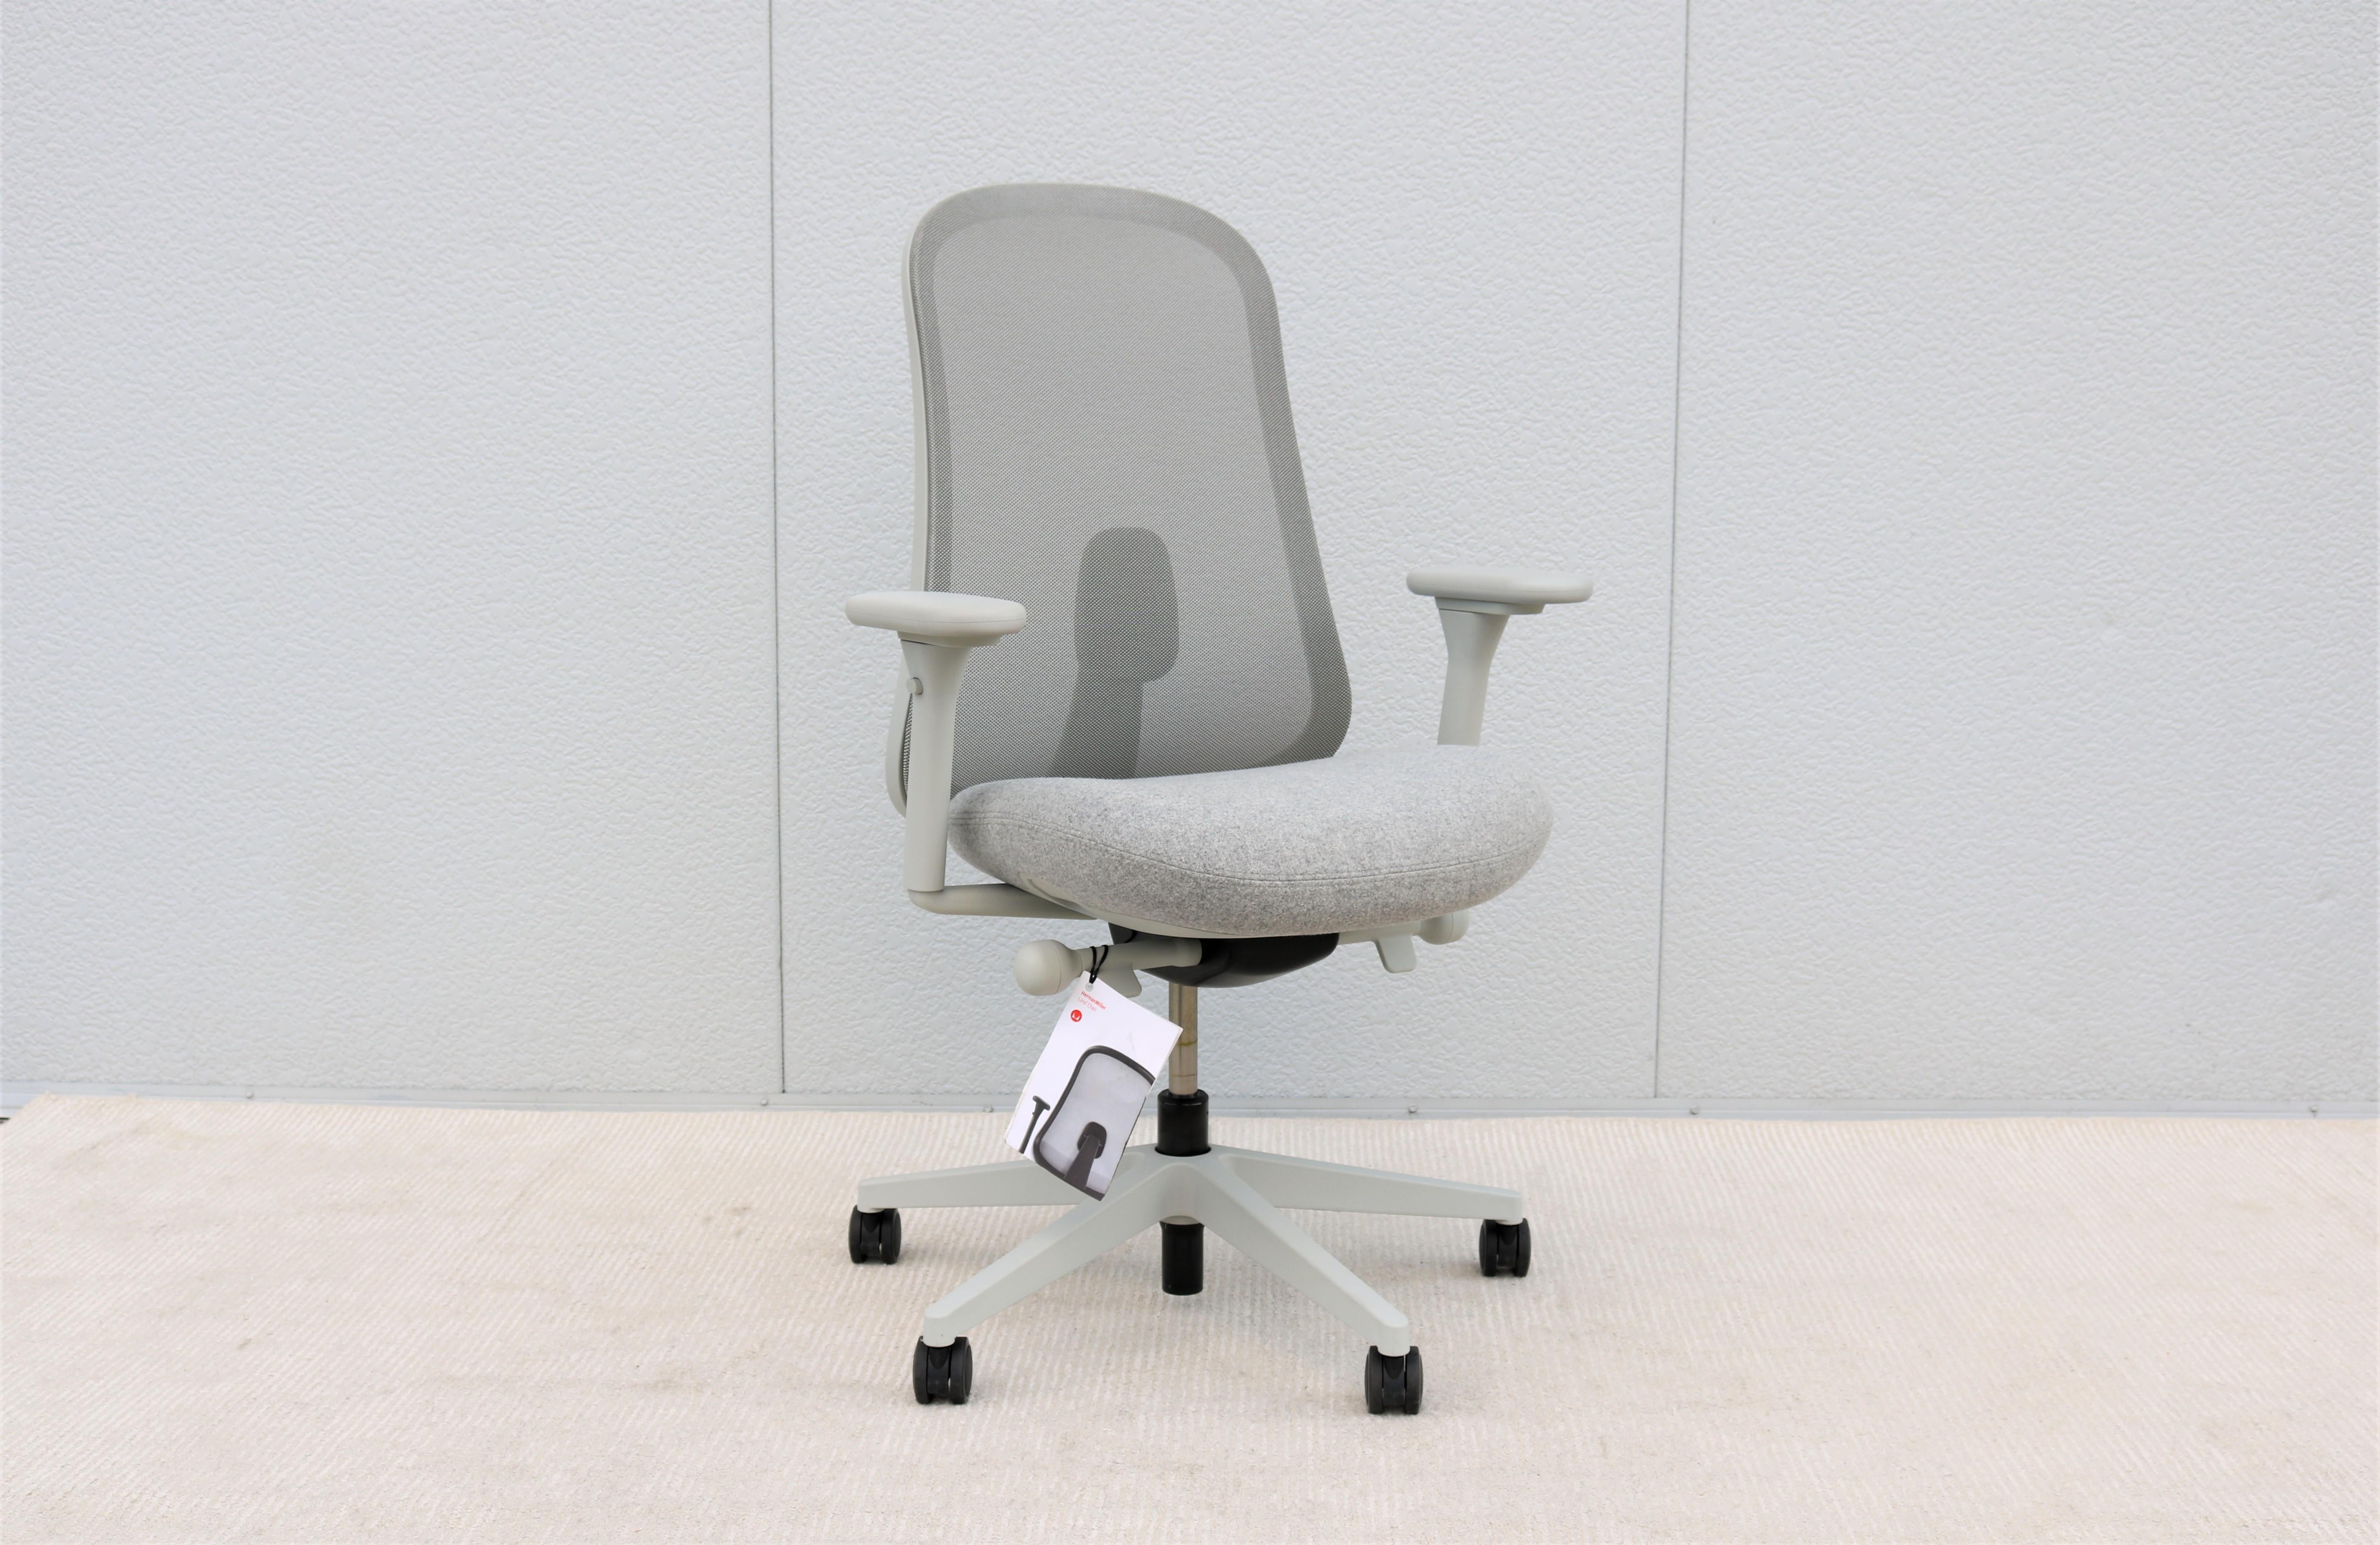 The Lino chair is well-designed by Sam Hecht and Kim Colin for Herman Miller.
This comfortable office chair features a breathable Duo suspension mesh that provides integrated lumbar support and cooling comfort, that works together with the contoured